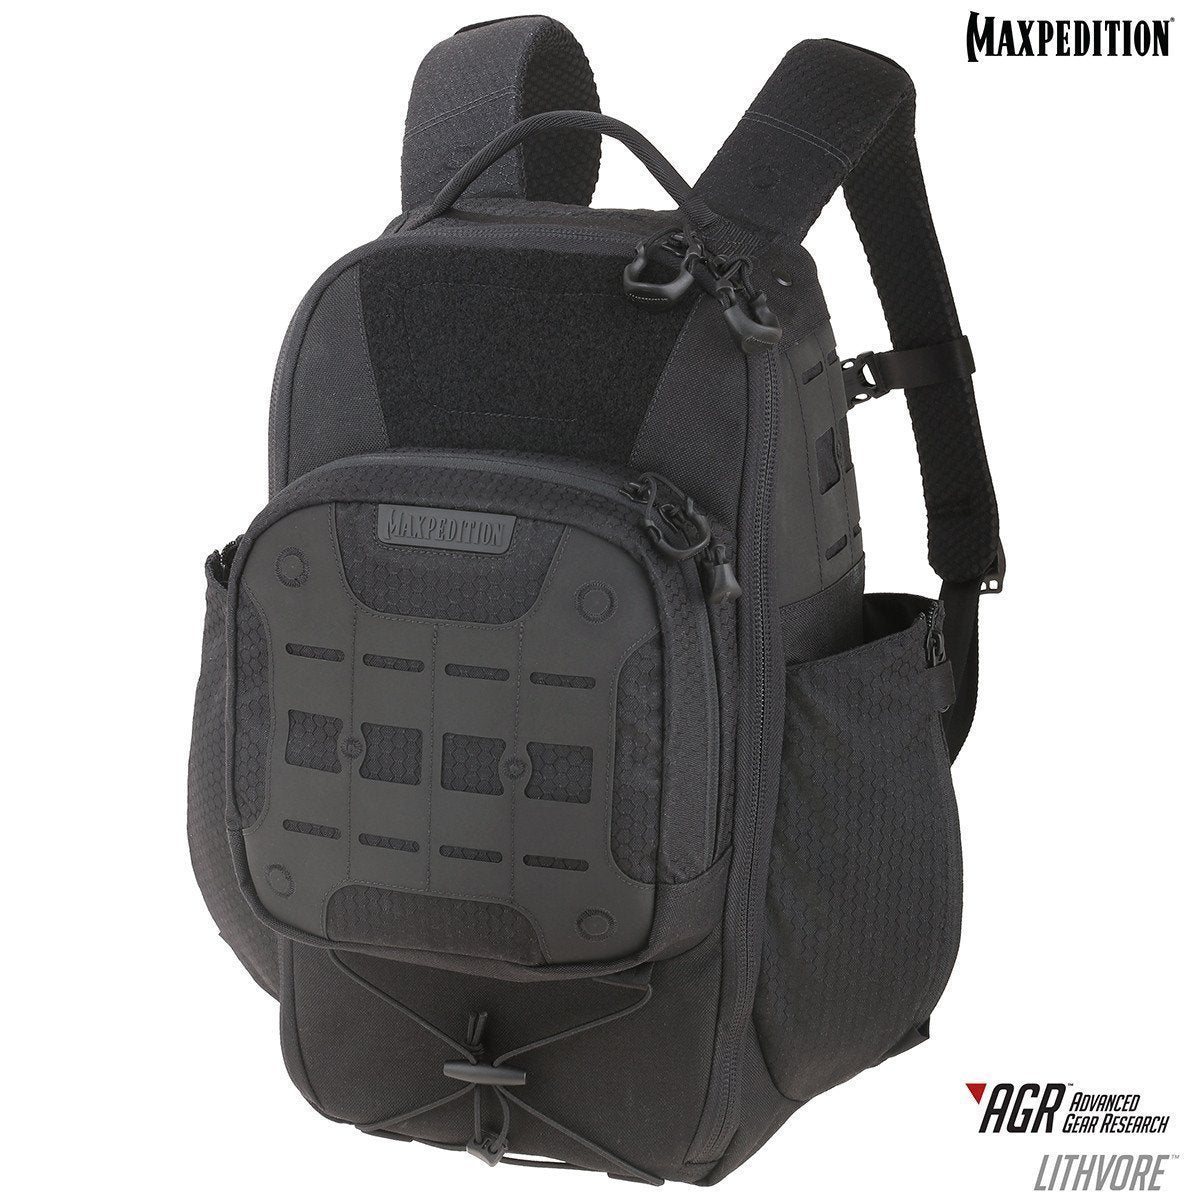 Maxpedition Lithvore Everyday Backpack 17L Backpacks Maxpedition Gray Tactical Gear Supplier Tactical Distributors Australia